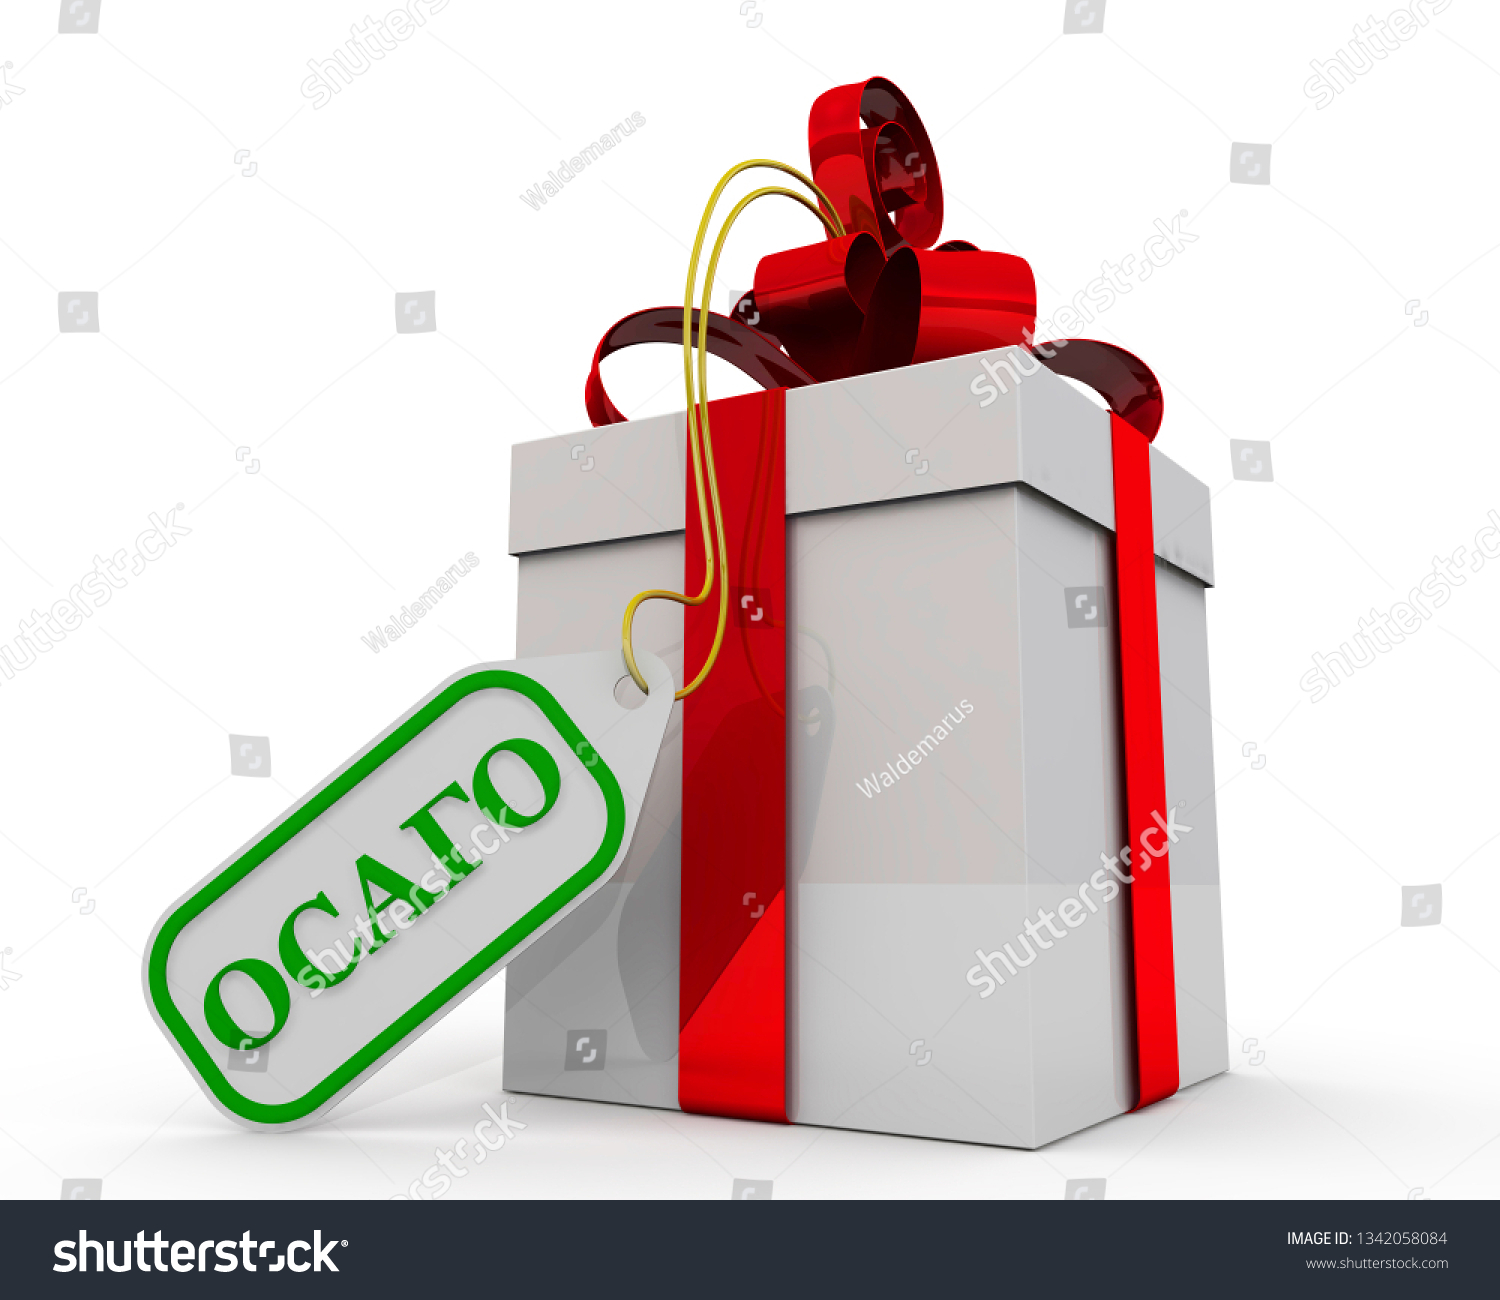 Ctp Insurance Gift Car Insurance Gift Stock Illustration throughout sizing 1500 X 1300